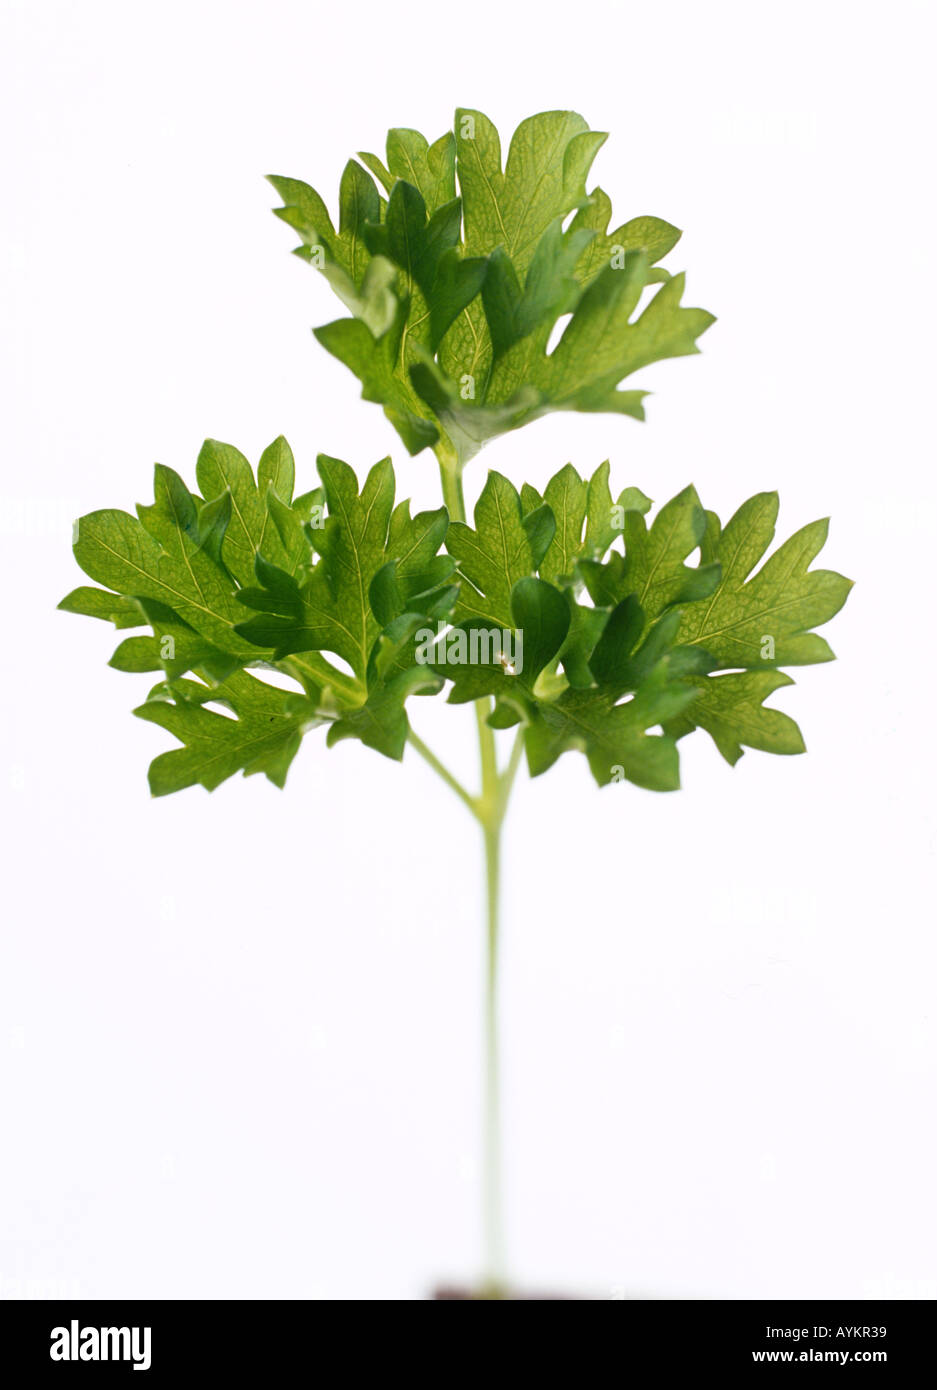 Petroselinum crispum, parsley, bright green leaves with serrated, curly edges, Stock Photo